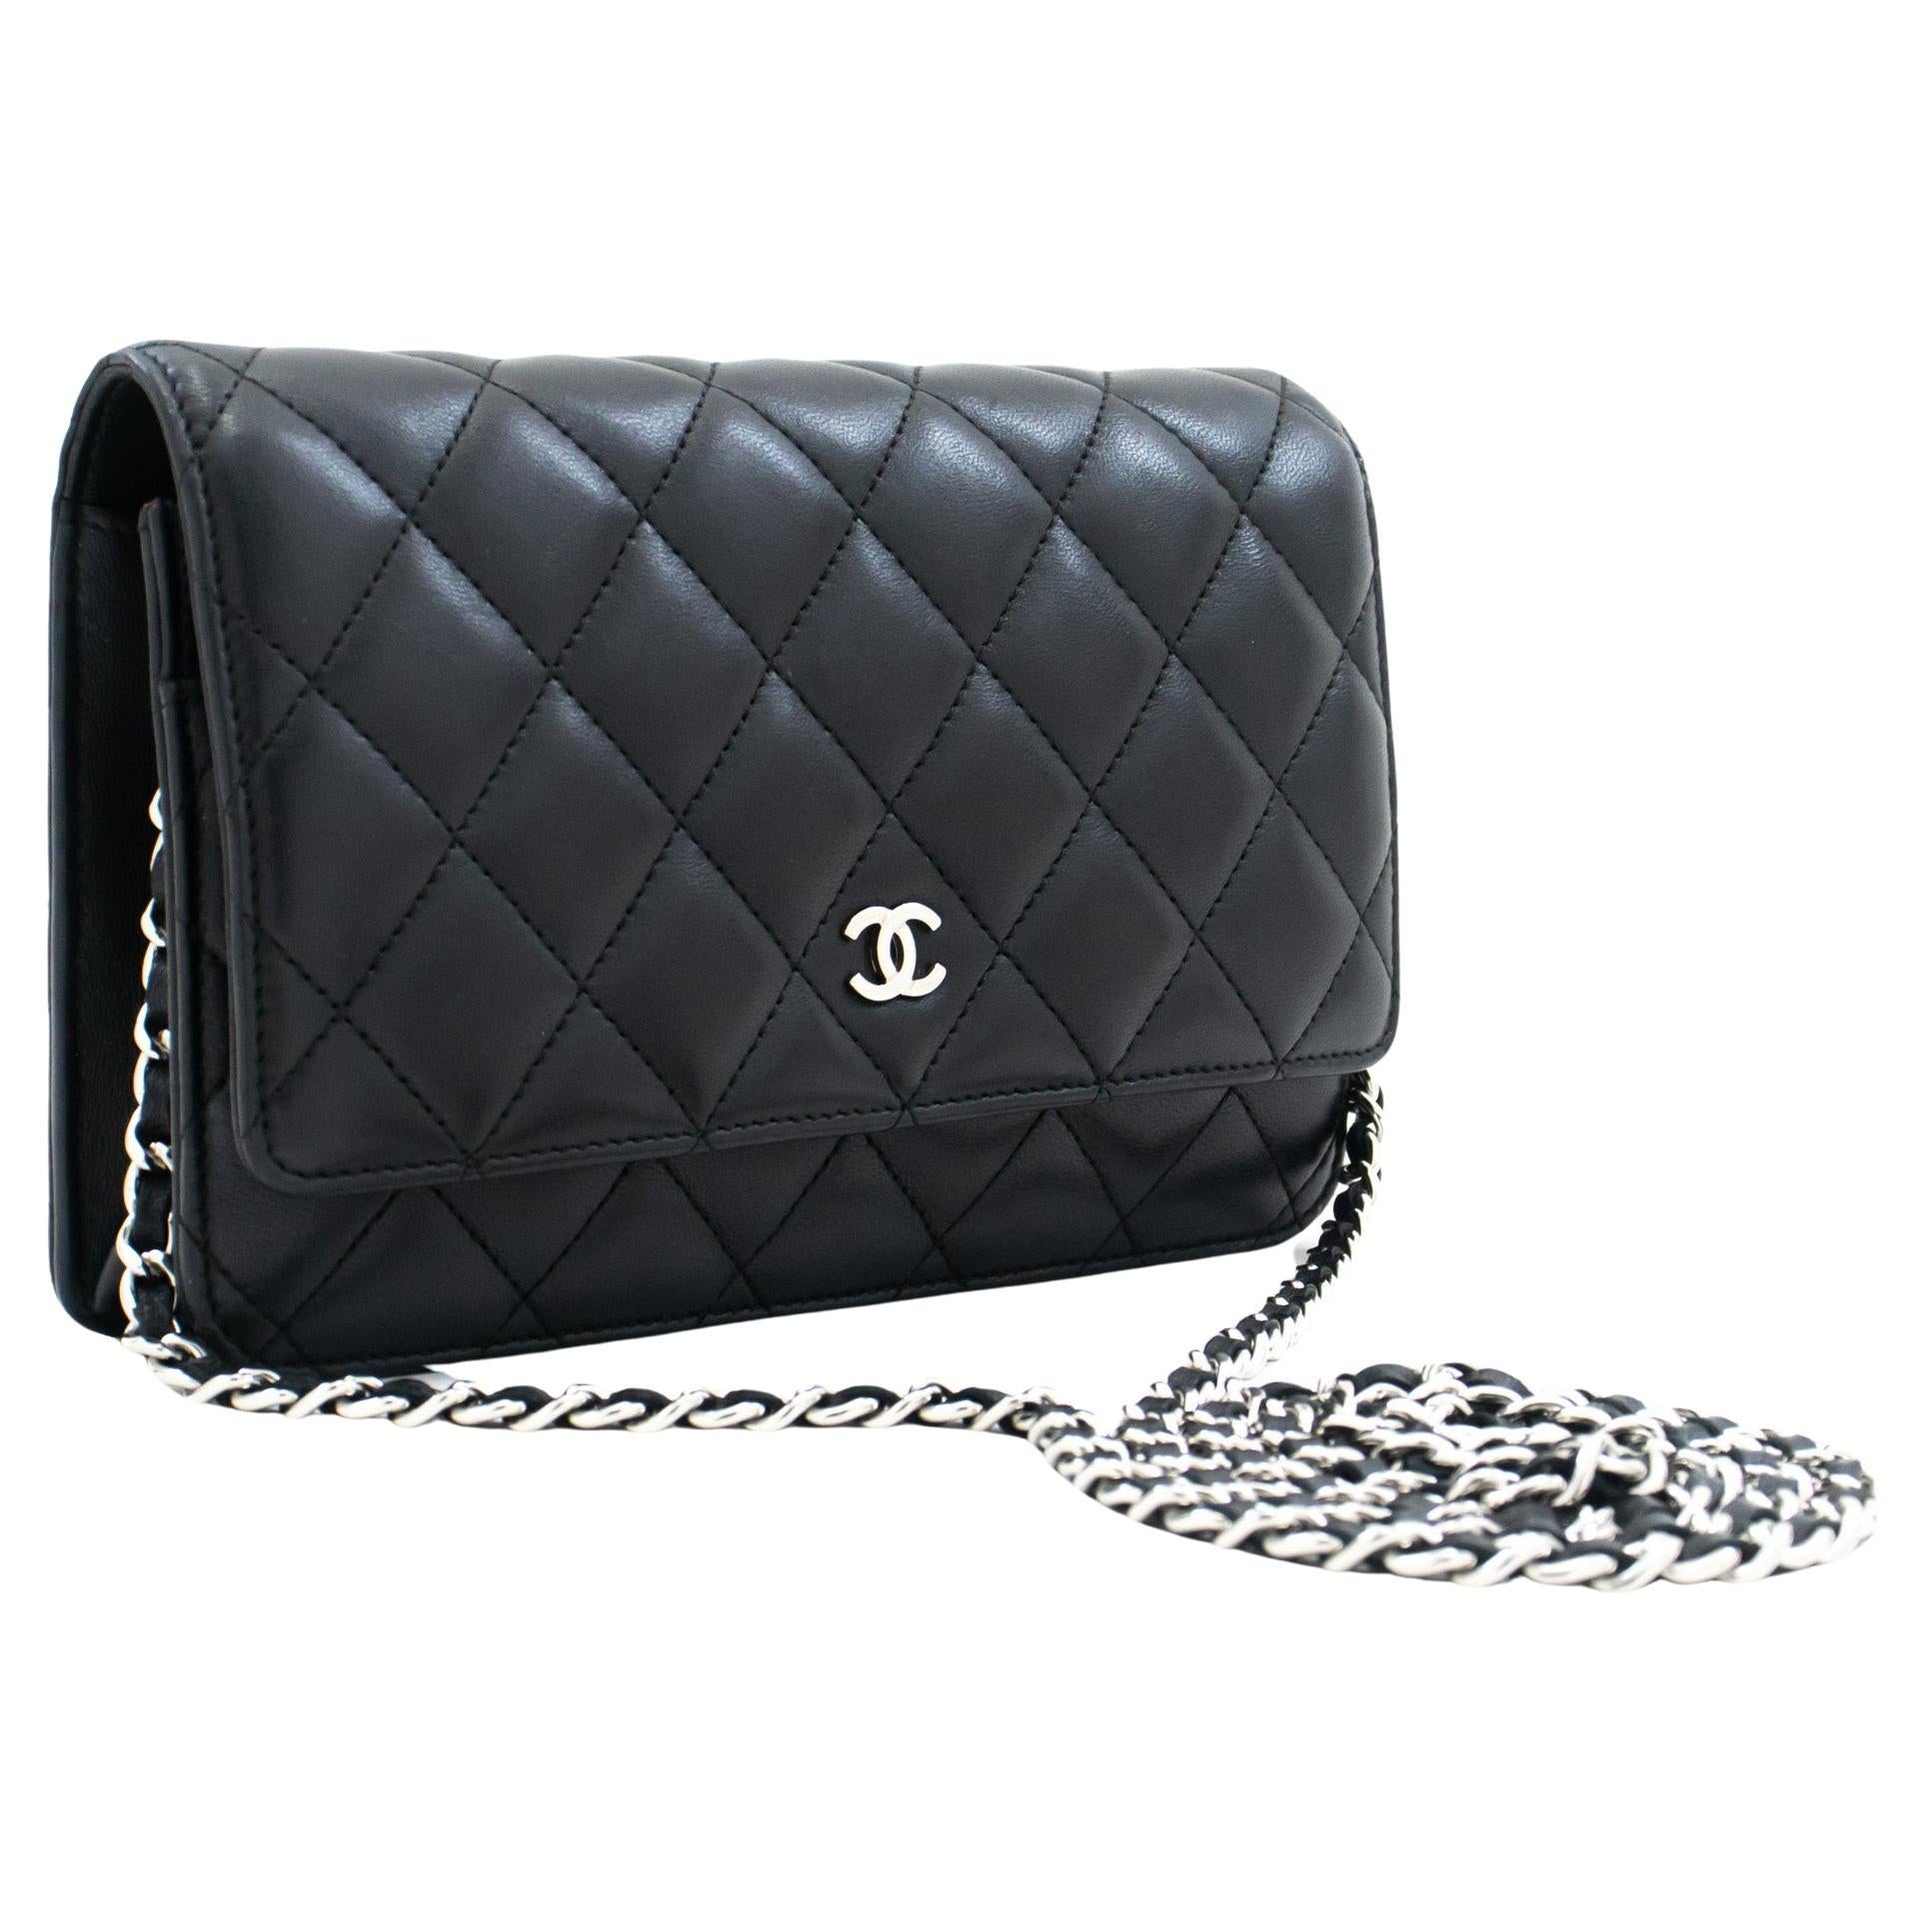 1997 Chanel Bag - 135 For Sale on 1stDibs  chanel bag 1997, chanel classic  flap 1997, 97 sins leather bag